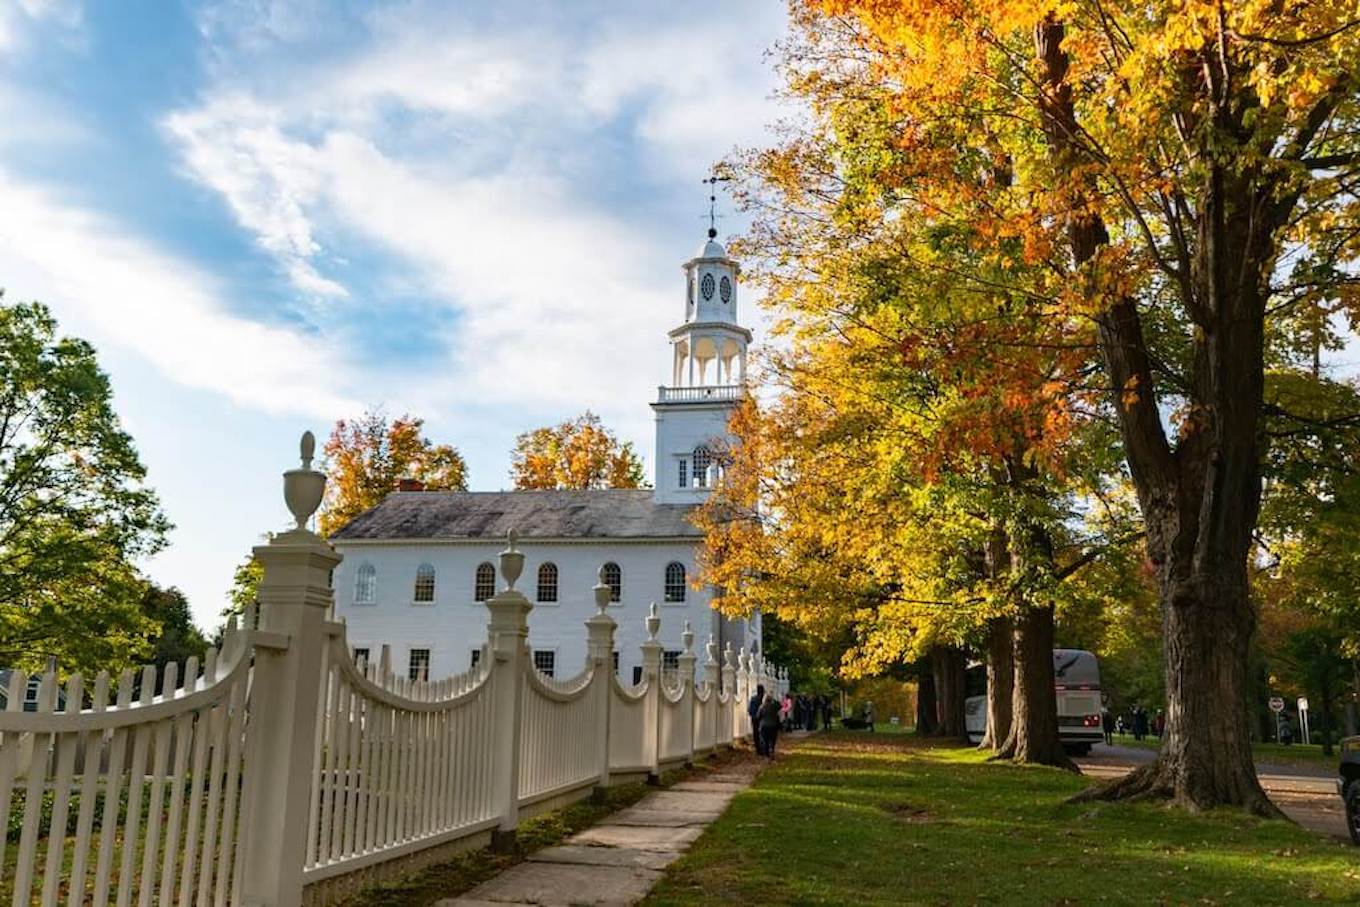 A white church and picket fence framed by fall leaves.